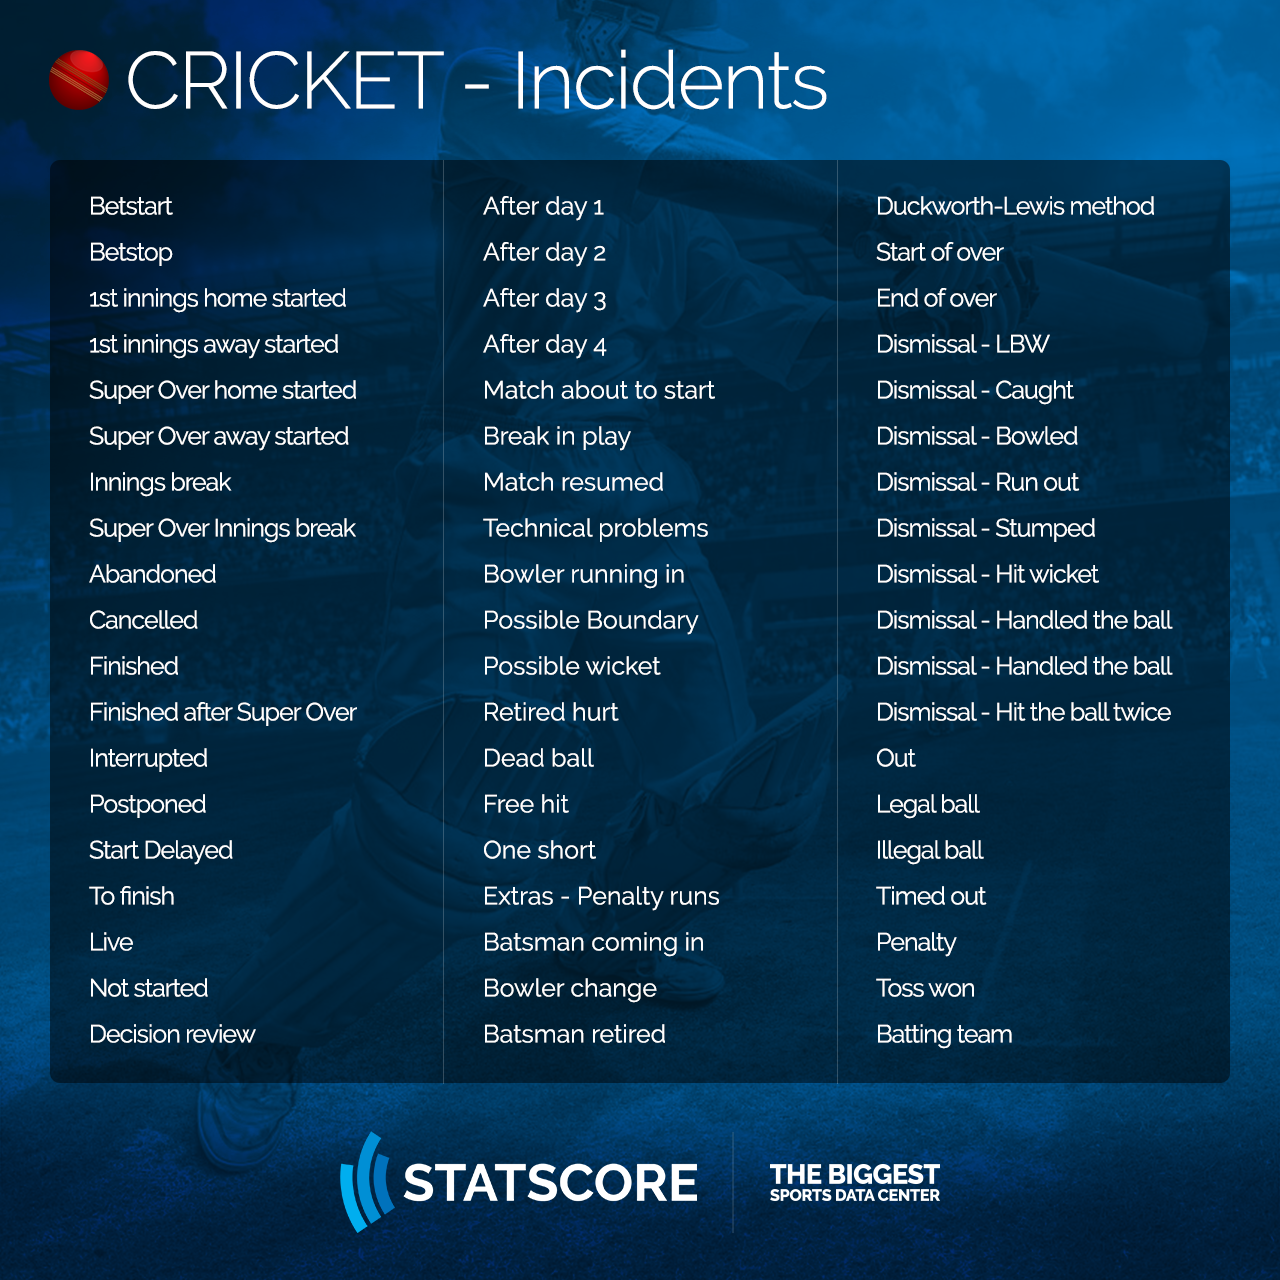 The infographic with list of the most important events in cricket match